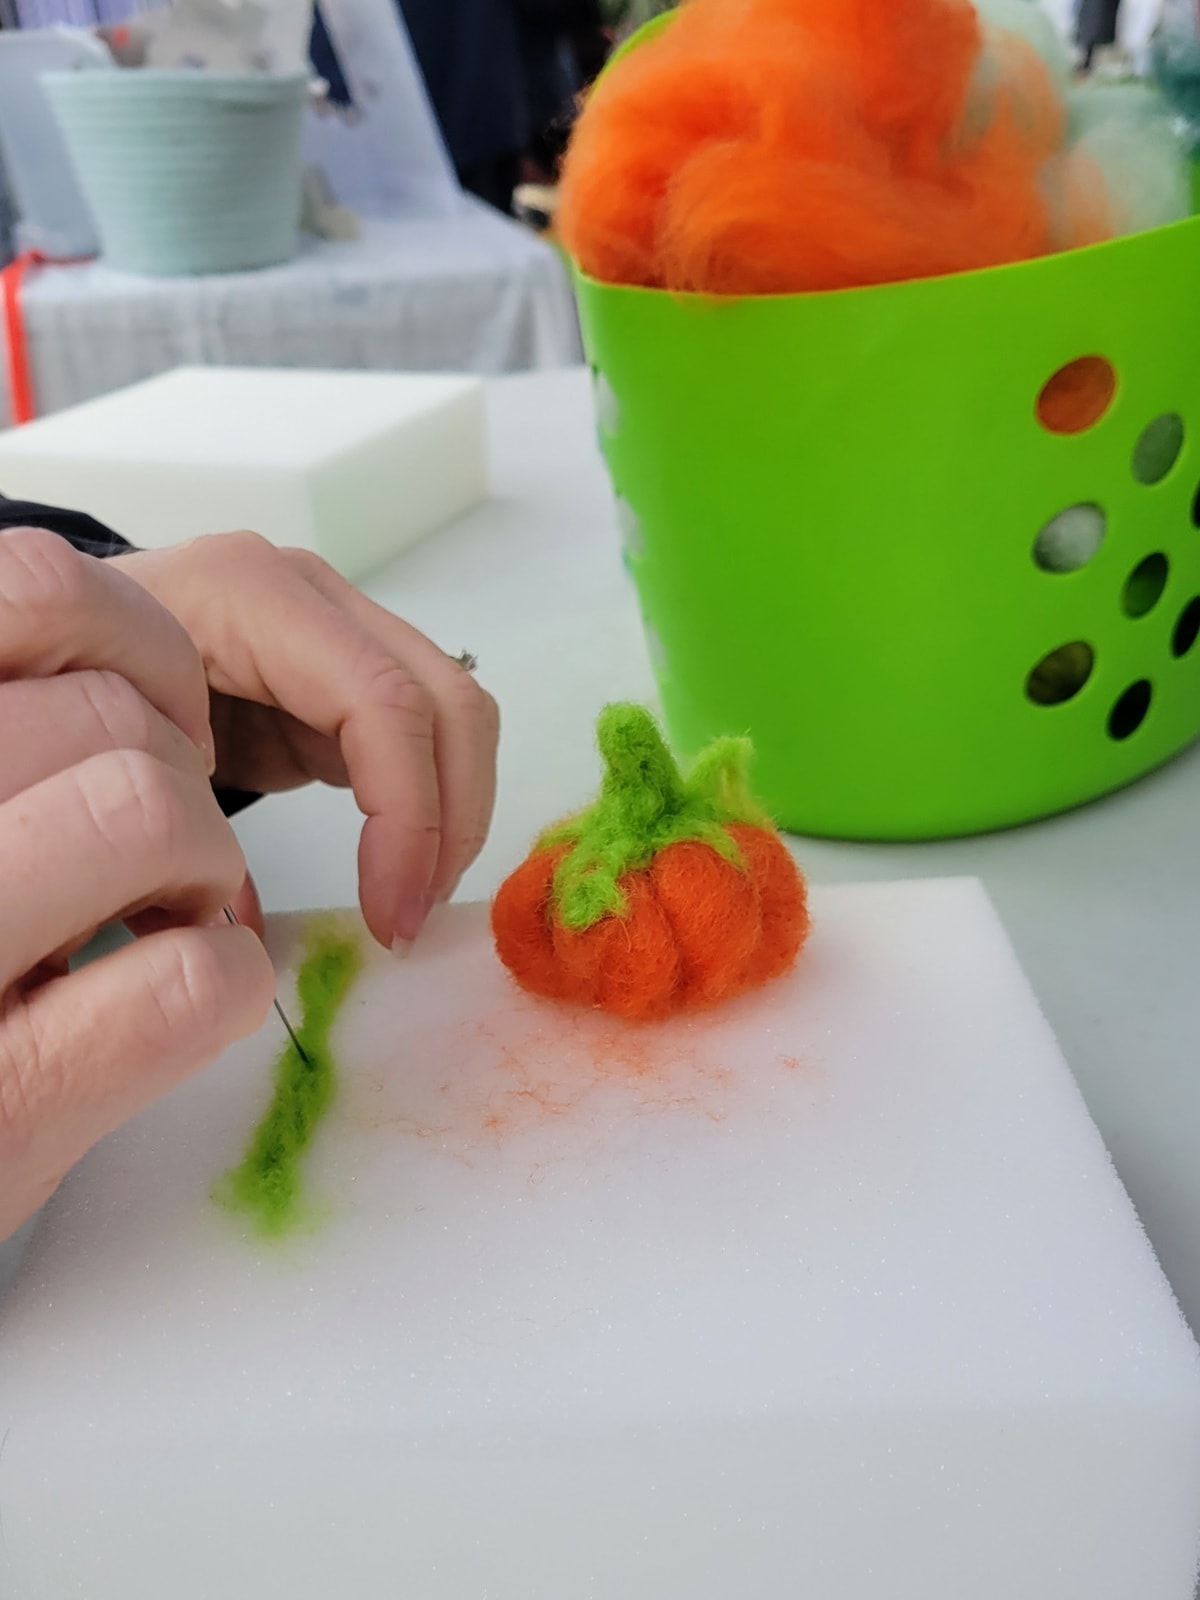 Image description: Two white hands working on needle felting. A needle-felted pumpkin is to hand.